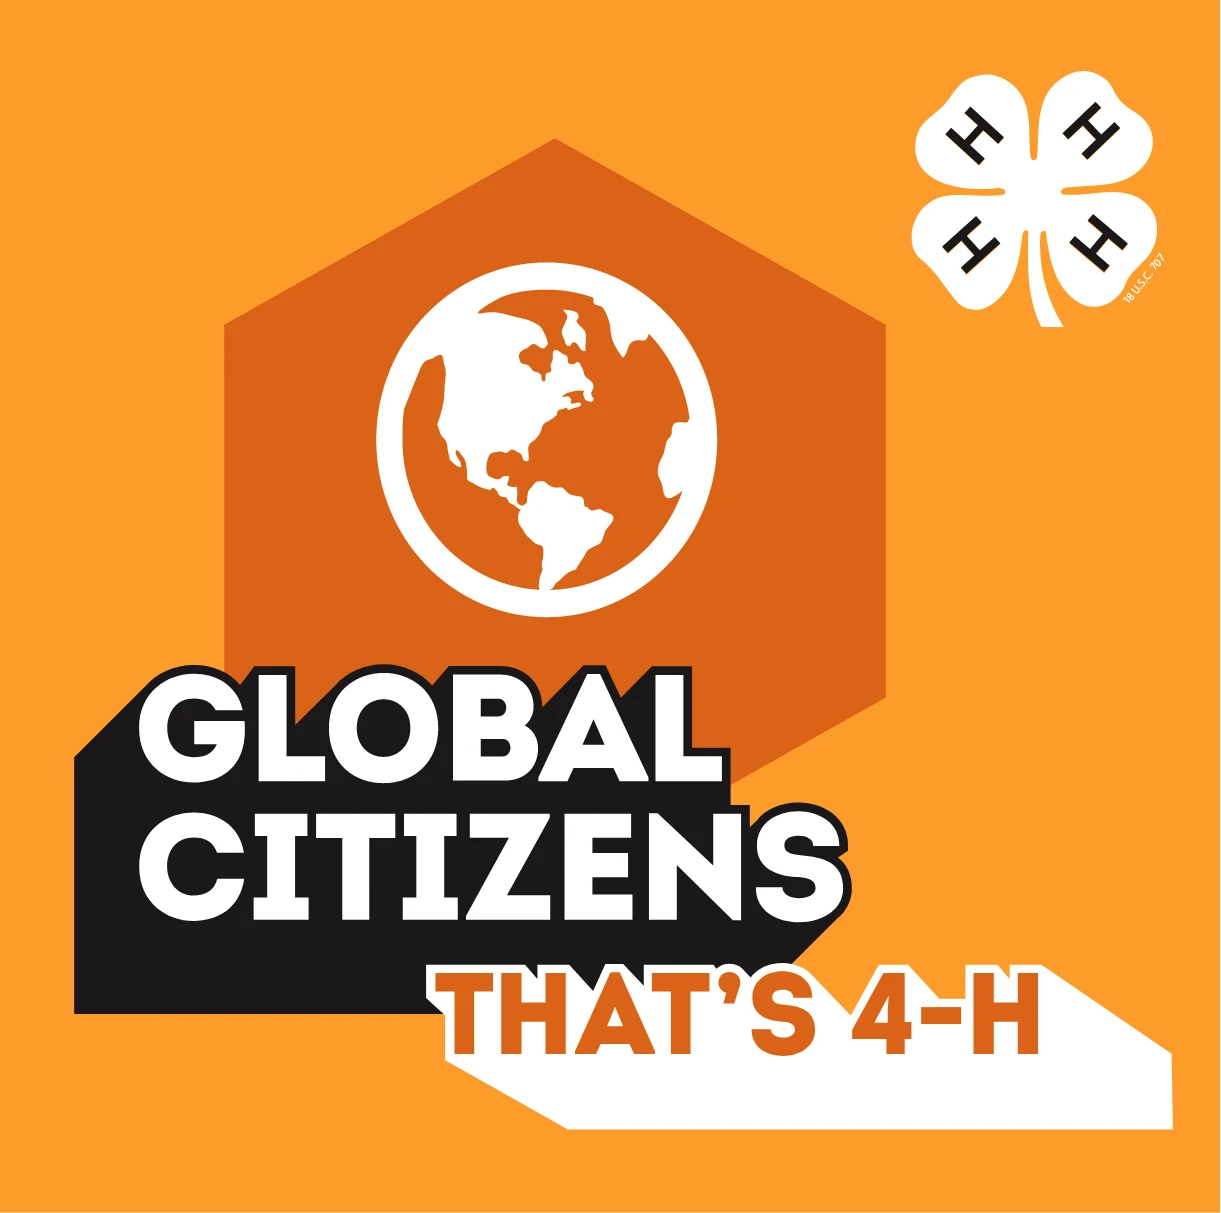 Global citizens that's 4 h.